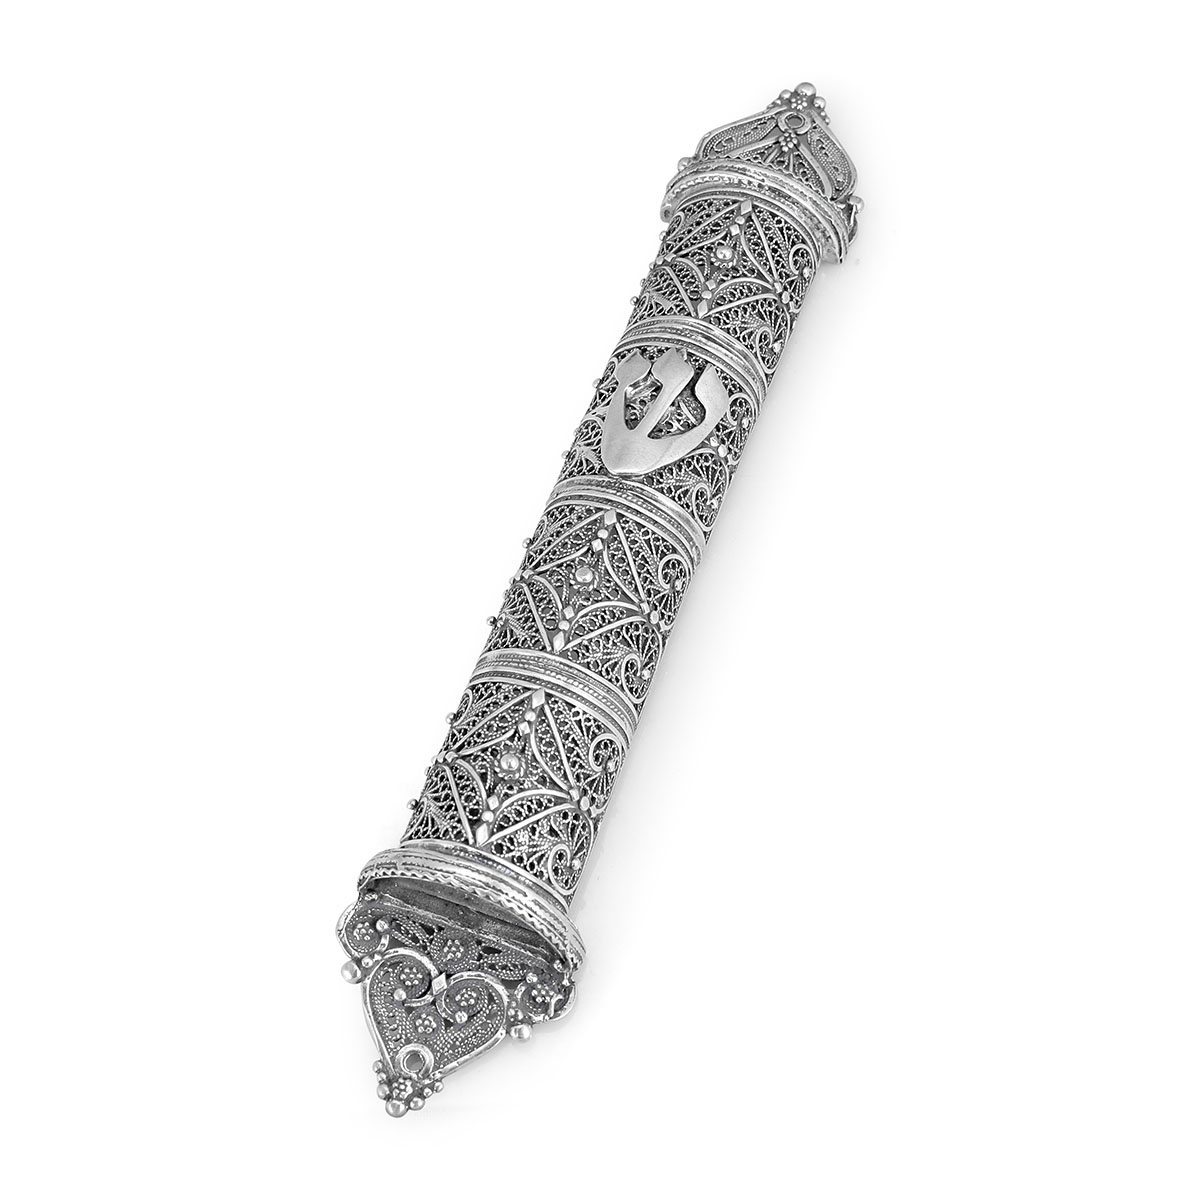 Traditional Yemenite Art Handcrafted Sterling Silver Mezuzah Case With Intricate Filigree Design - 1